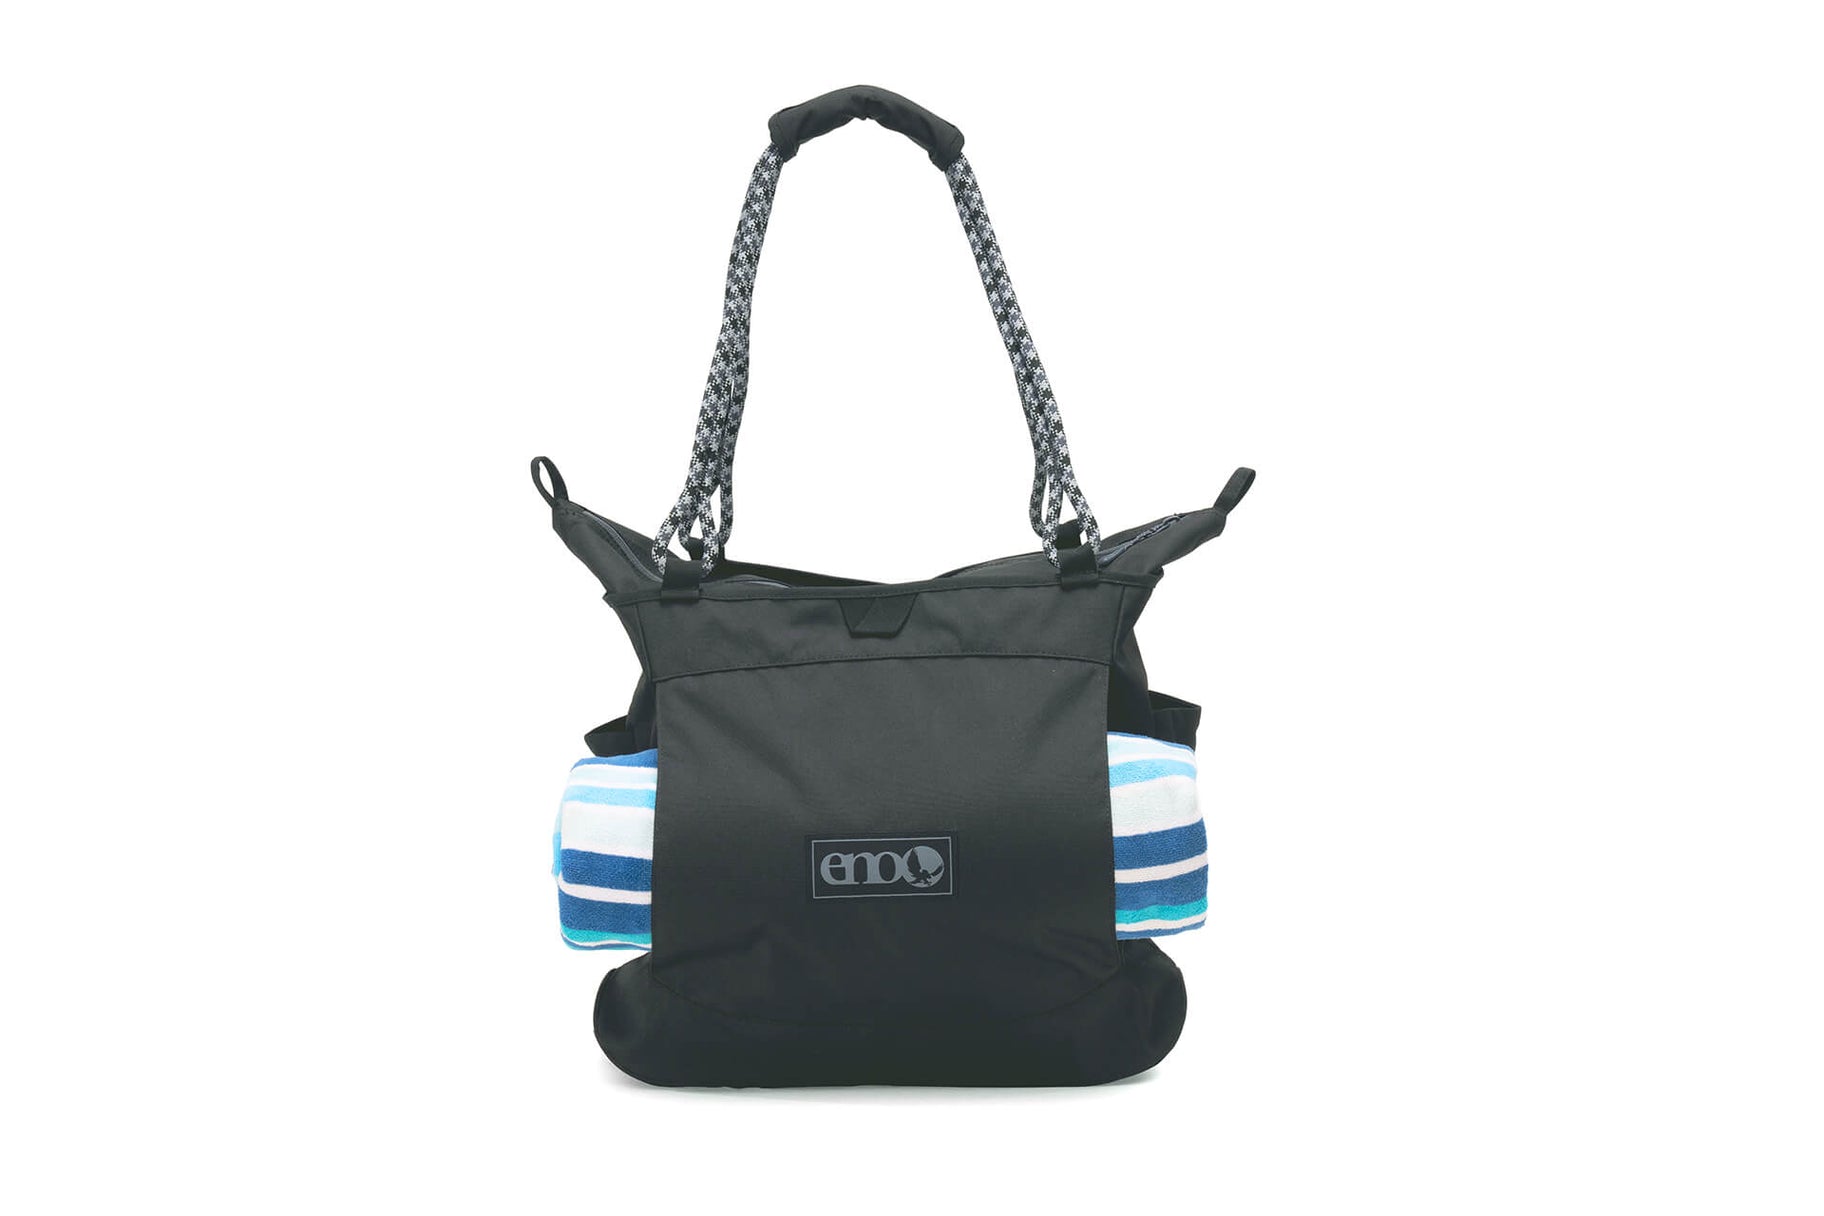 Relay Tote - Recycled Yoga, Beach and Festival Bag | ENO